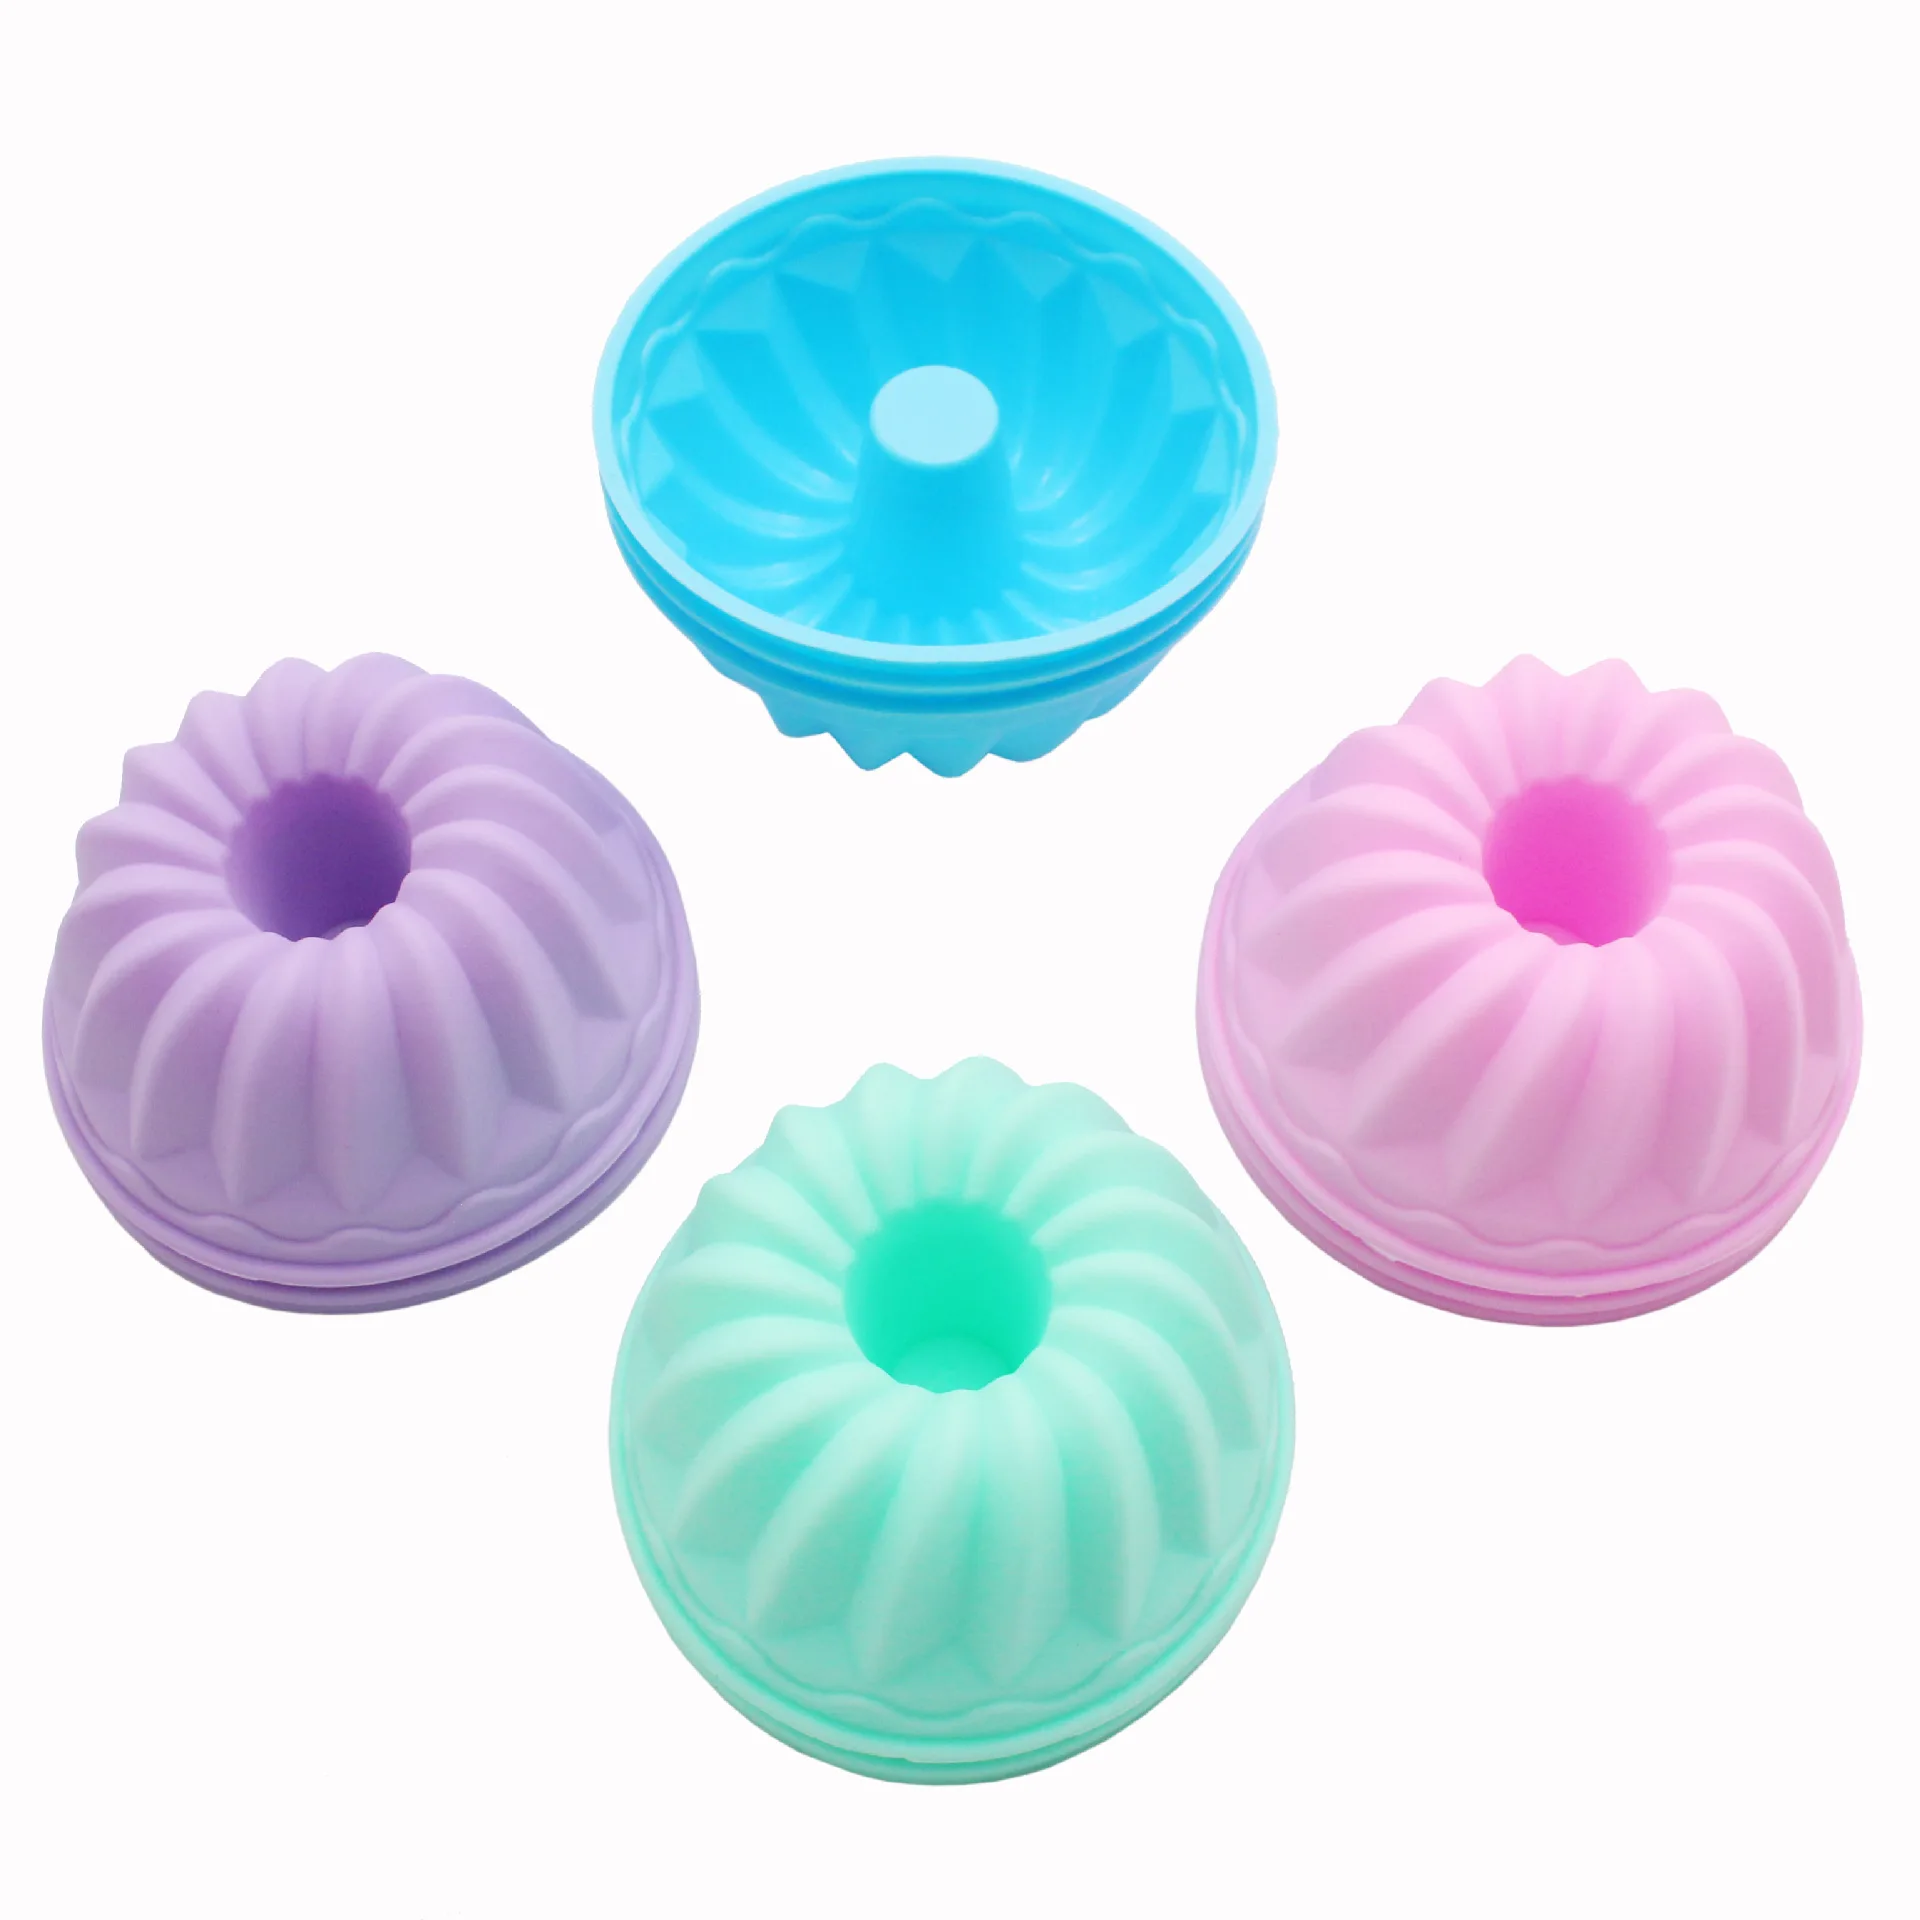 Hot Sale Nonstick Silicone Pumpkin Cupcake Liners Muffin Candy Jelly Mold Bundt Pan Dessert Tray Baking Cups